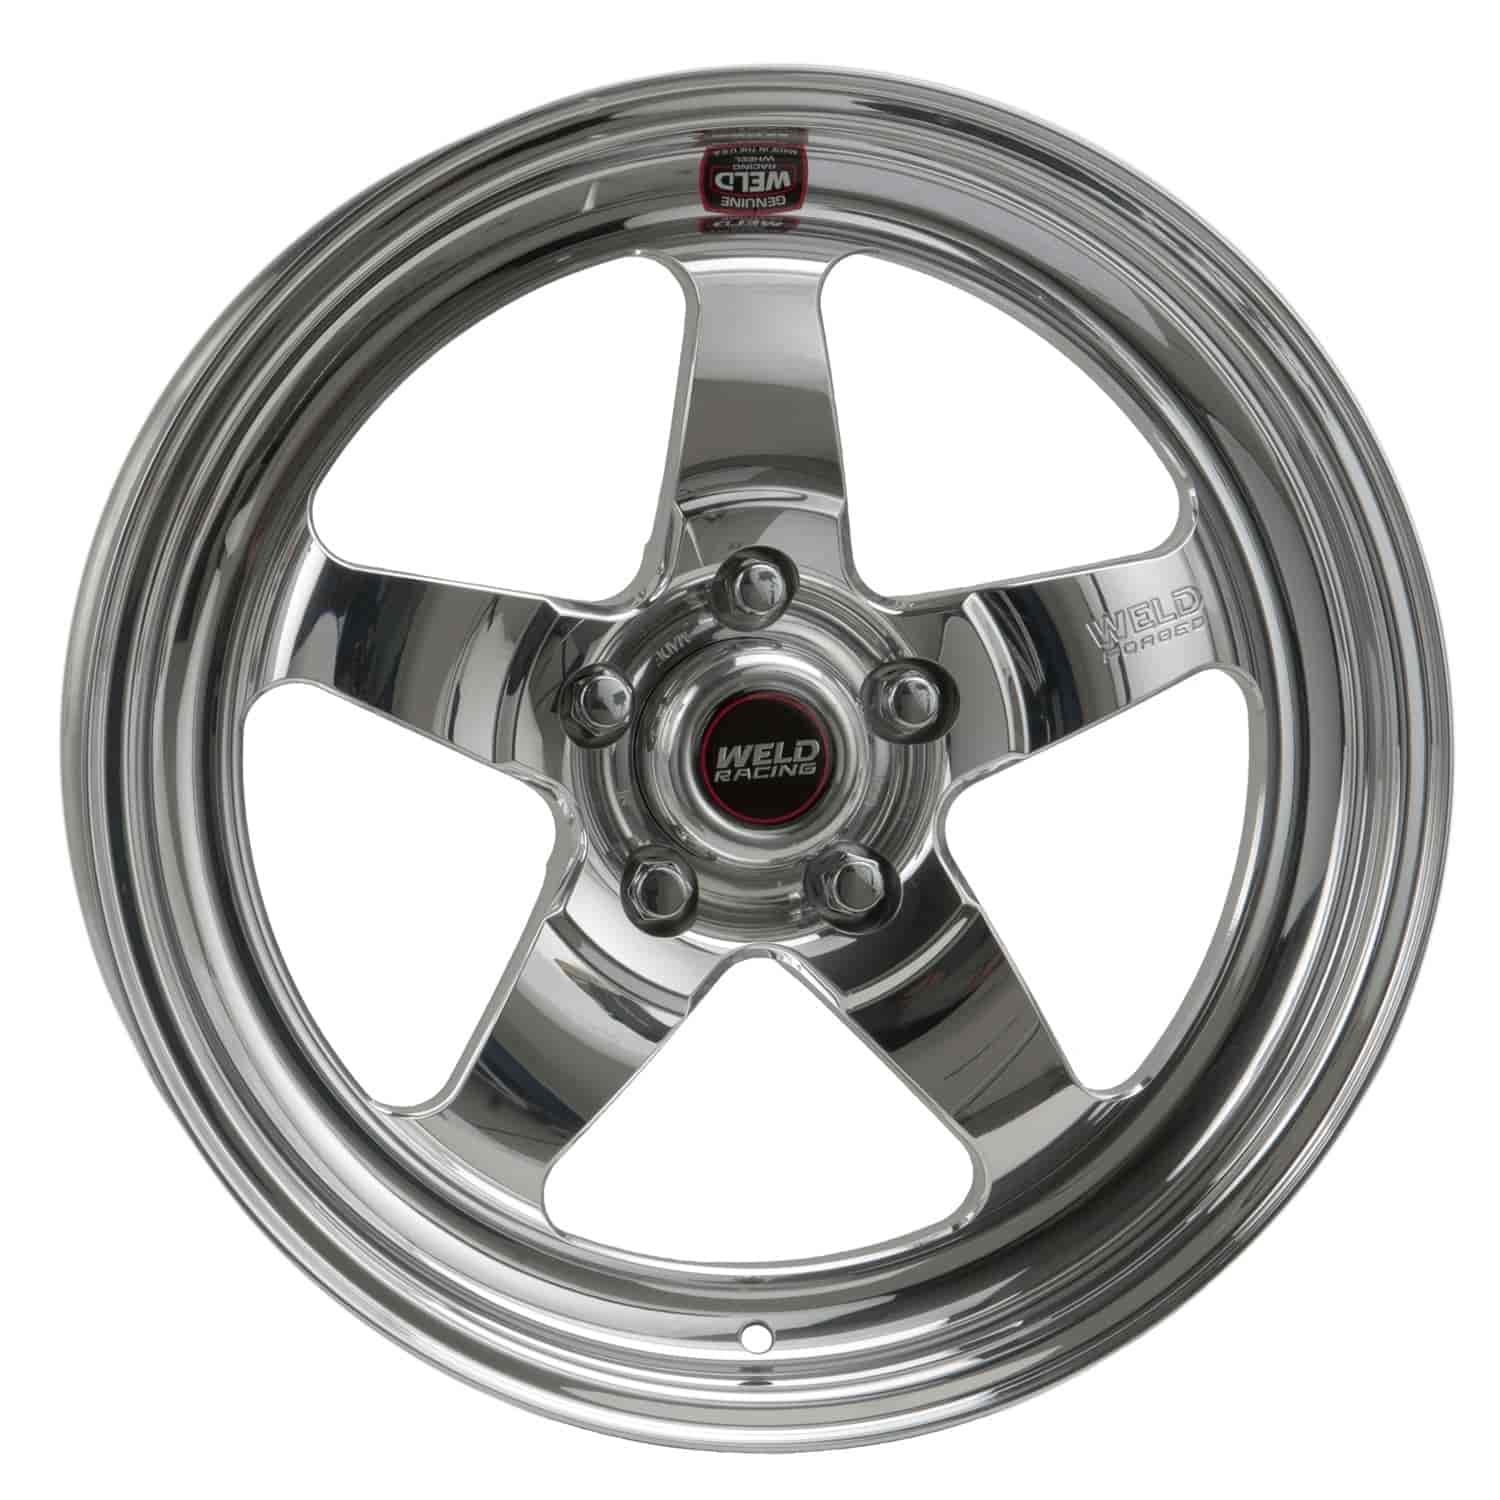 RT-S Series Wheel Size: 15" x 4" Bolt Circle: 5 x 4-3/4" Back Space: 1-1/2"